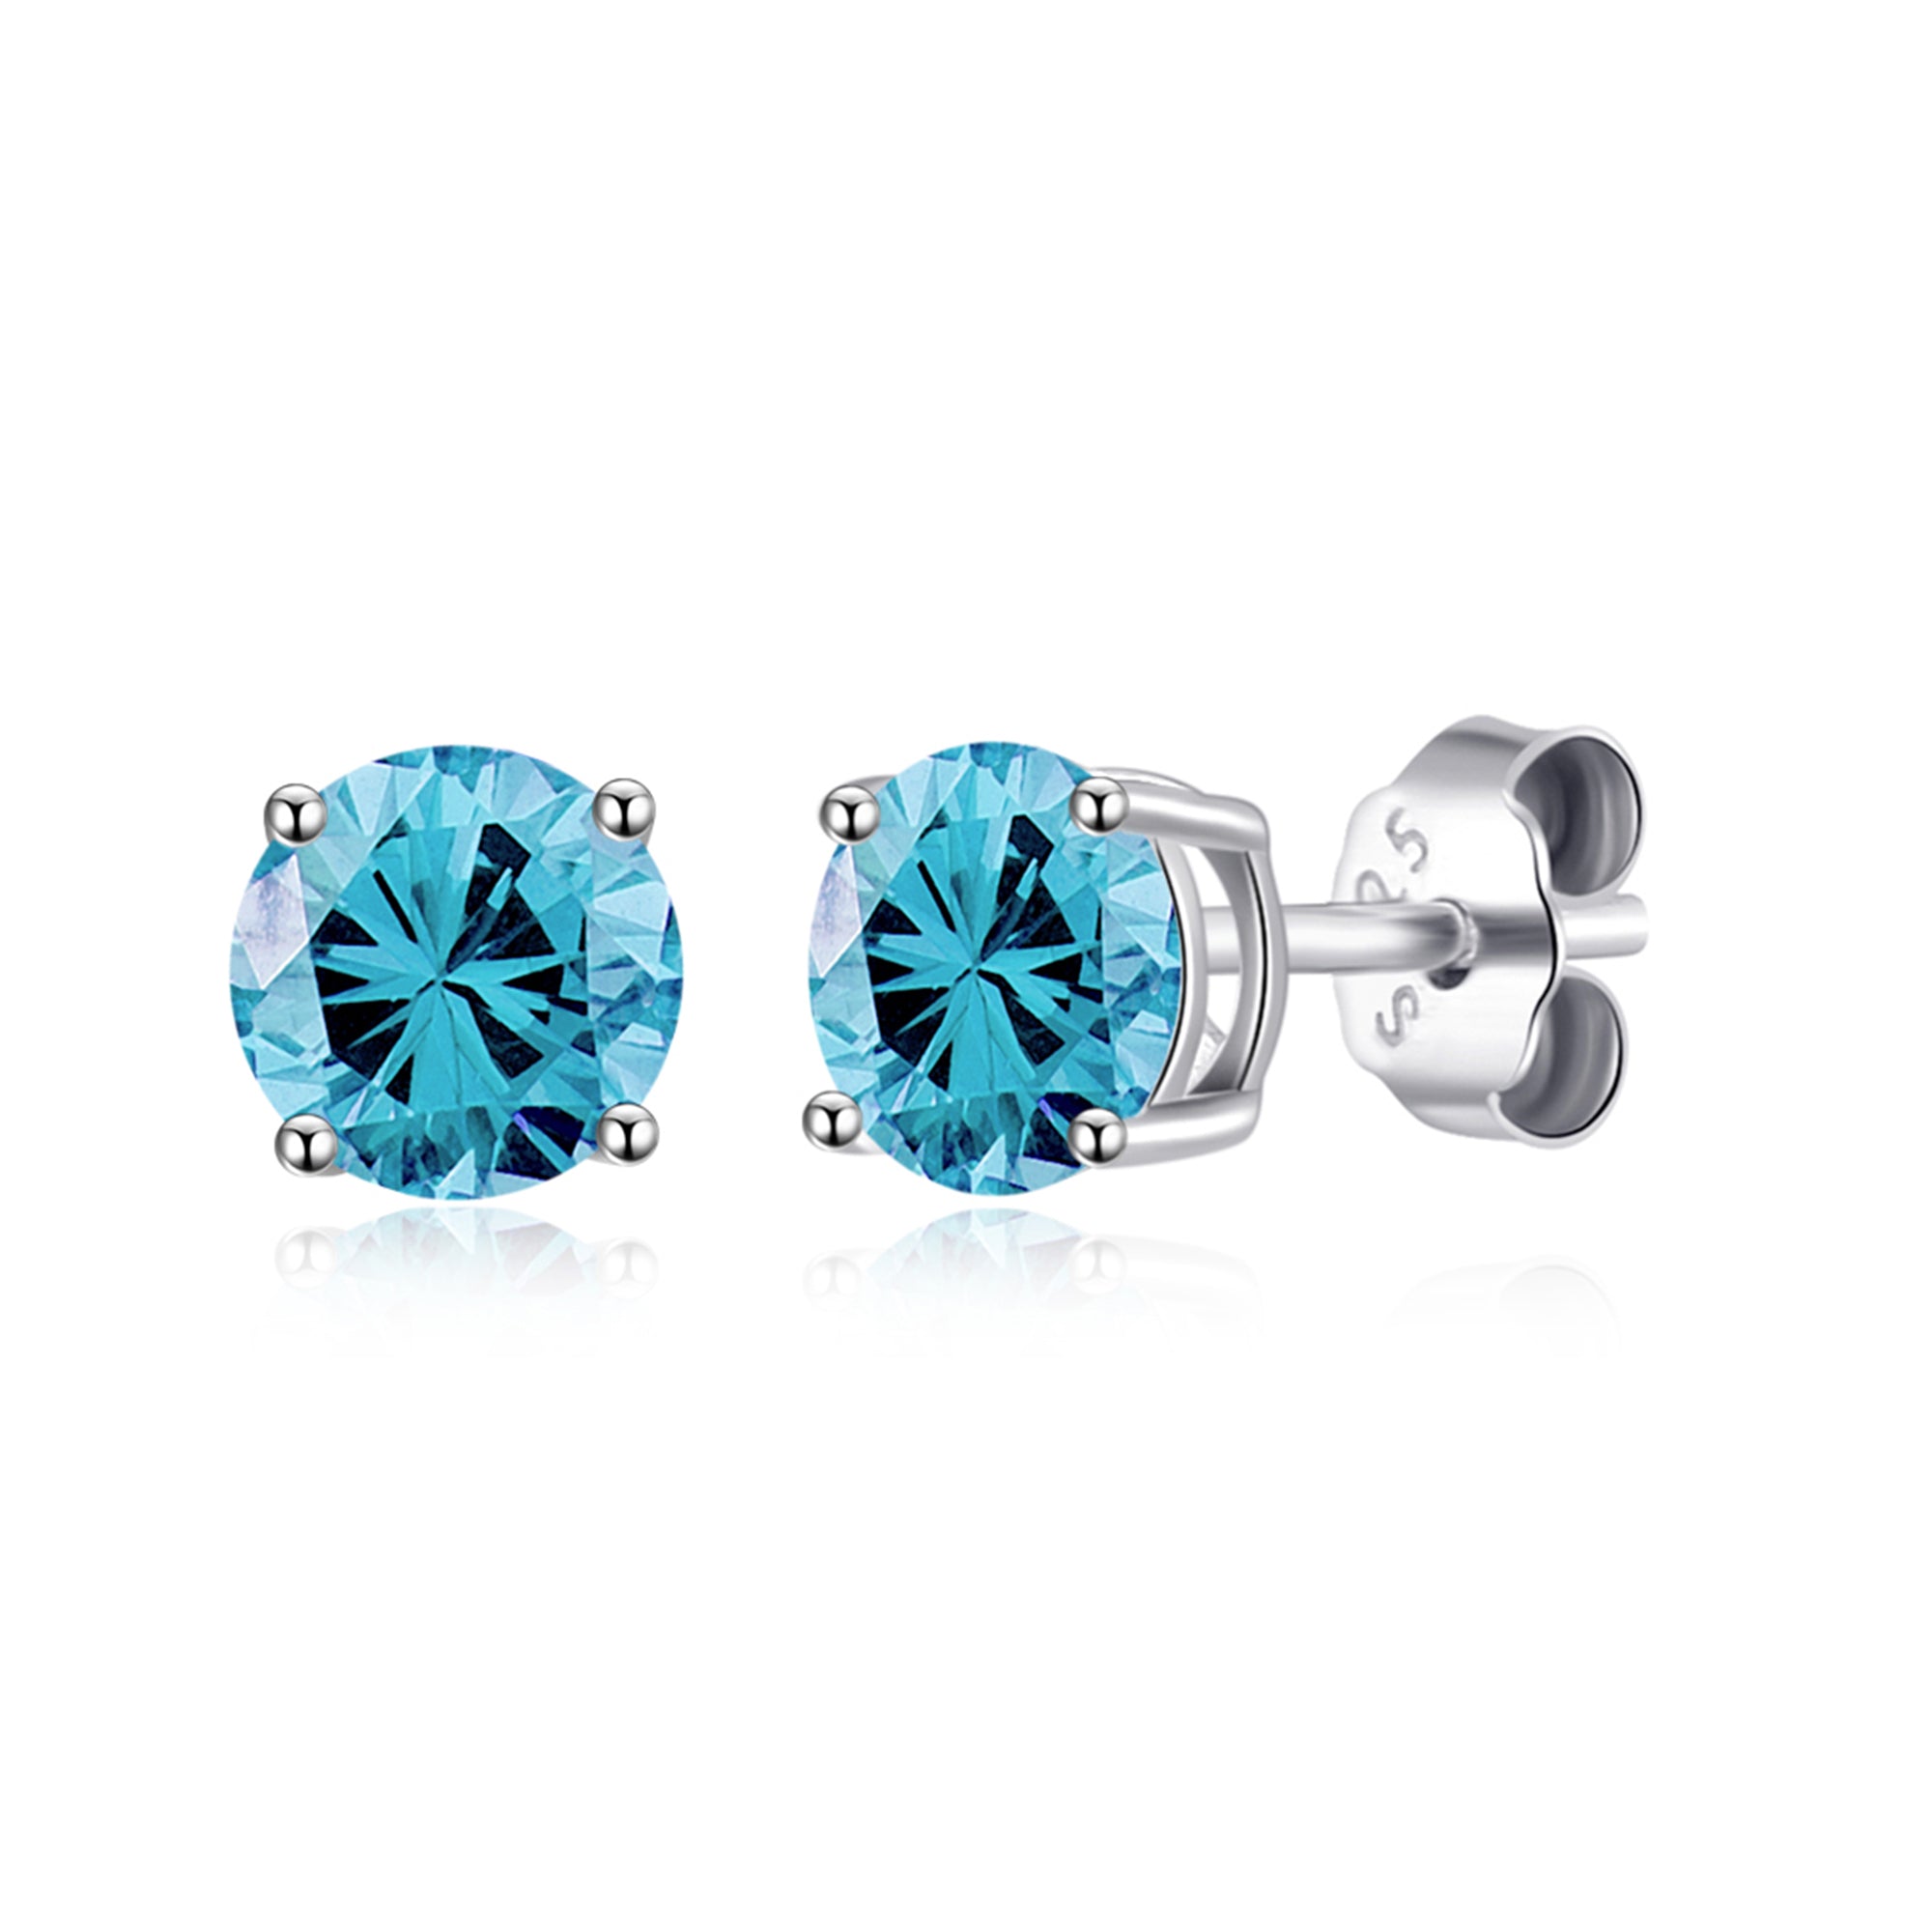 Sterling Silver March (Aquamarine) Birthstone Earrings Created with Zircondia® Crystals by Philip Jones Jewellery